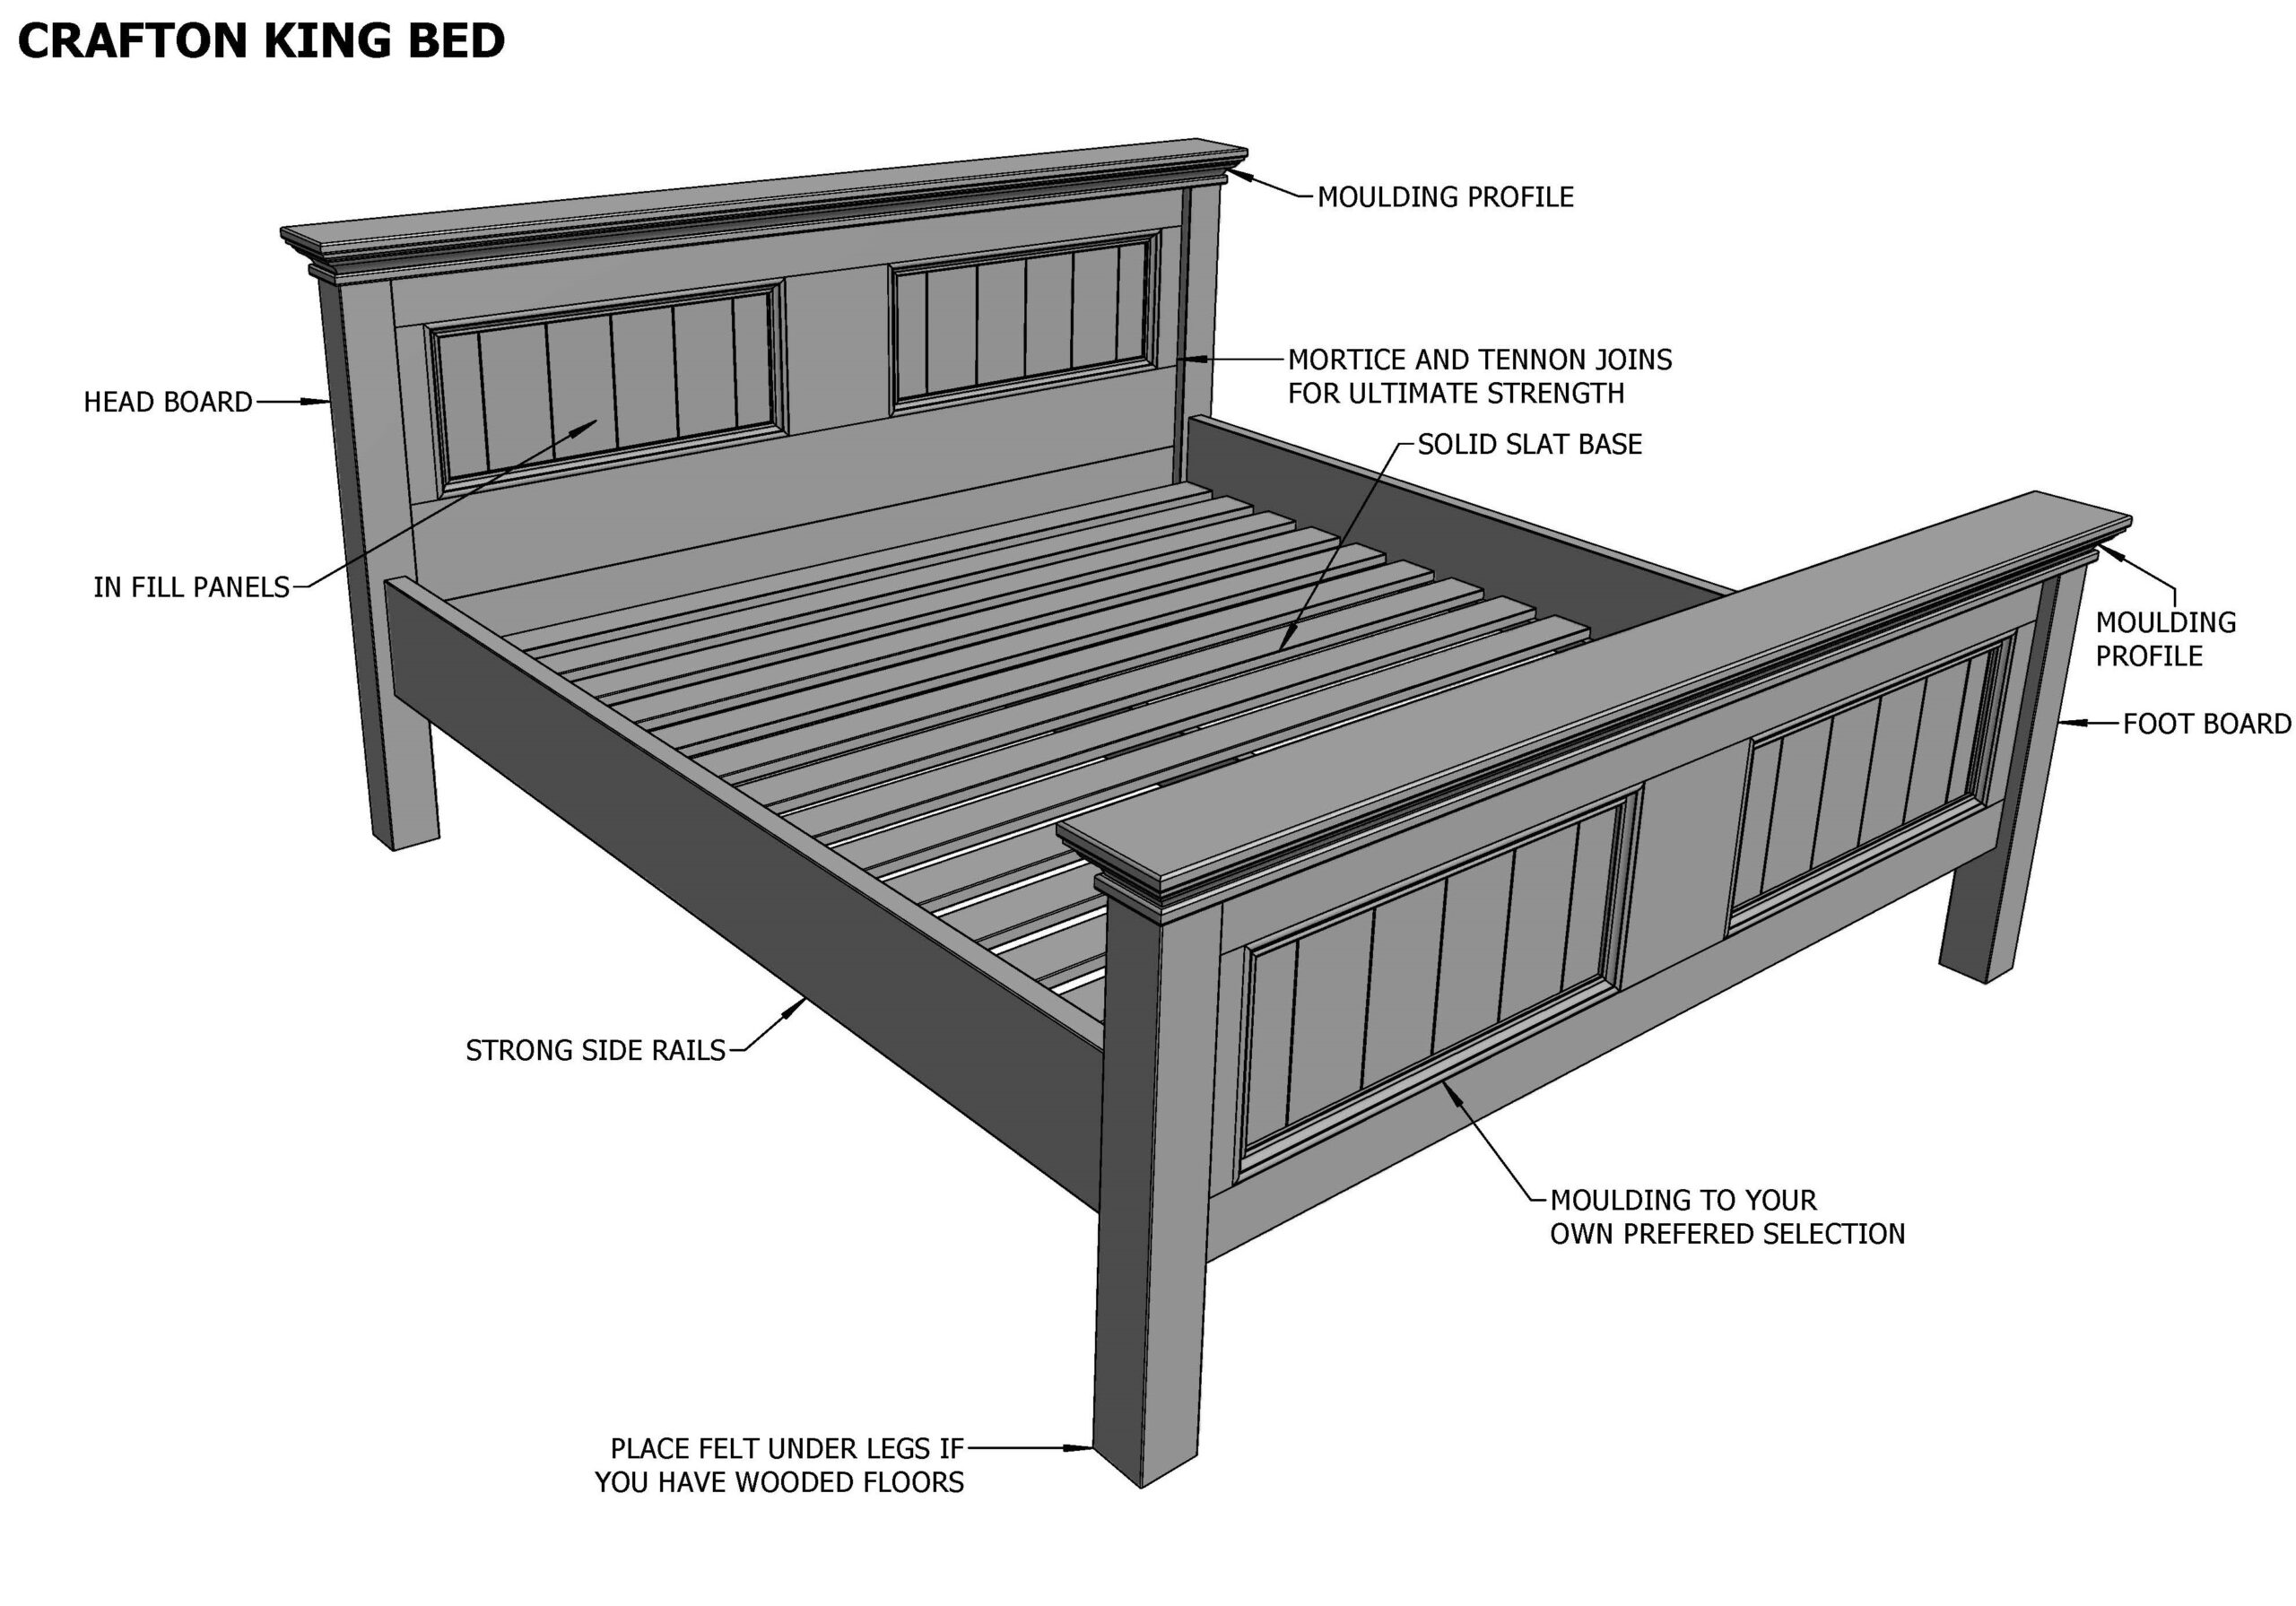 CRAFTON KING BED (Building Plans ONLY)